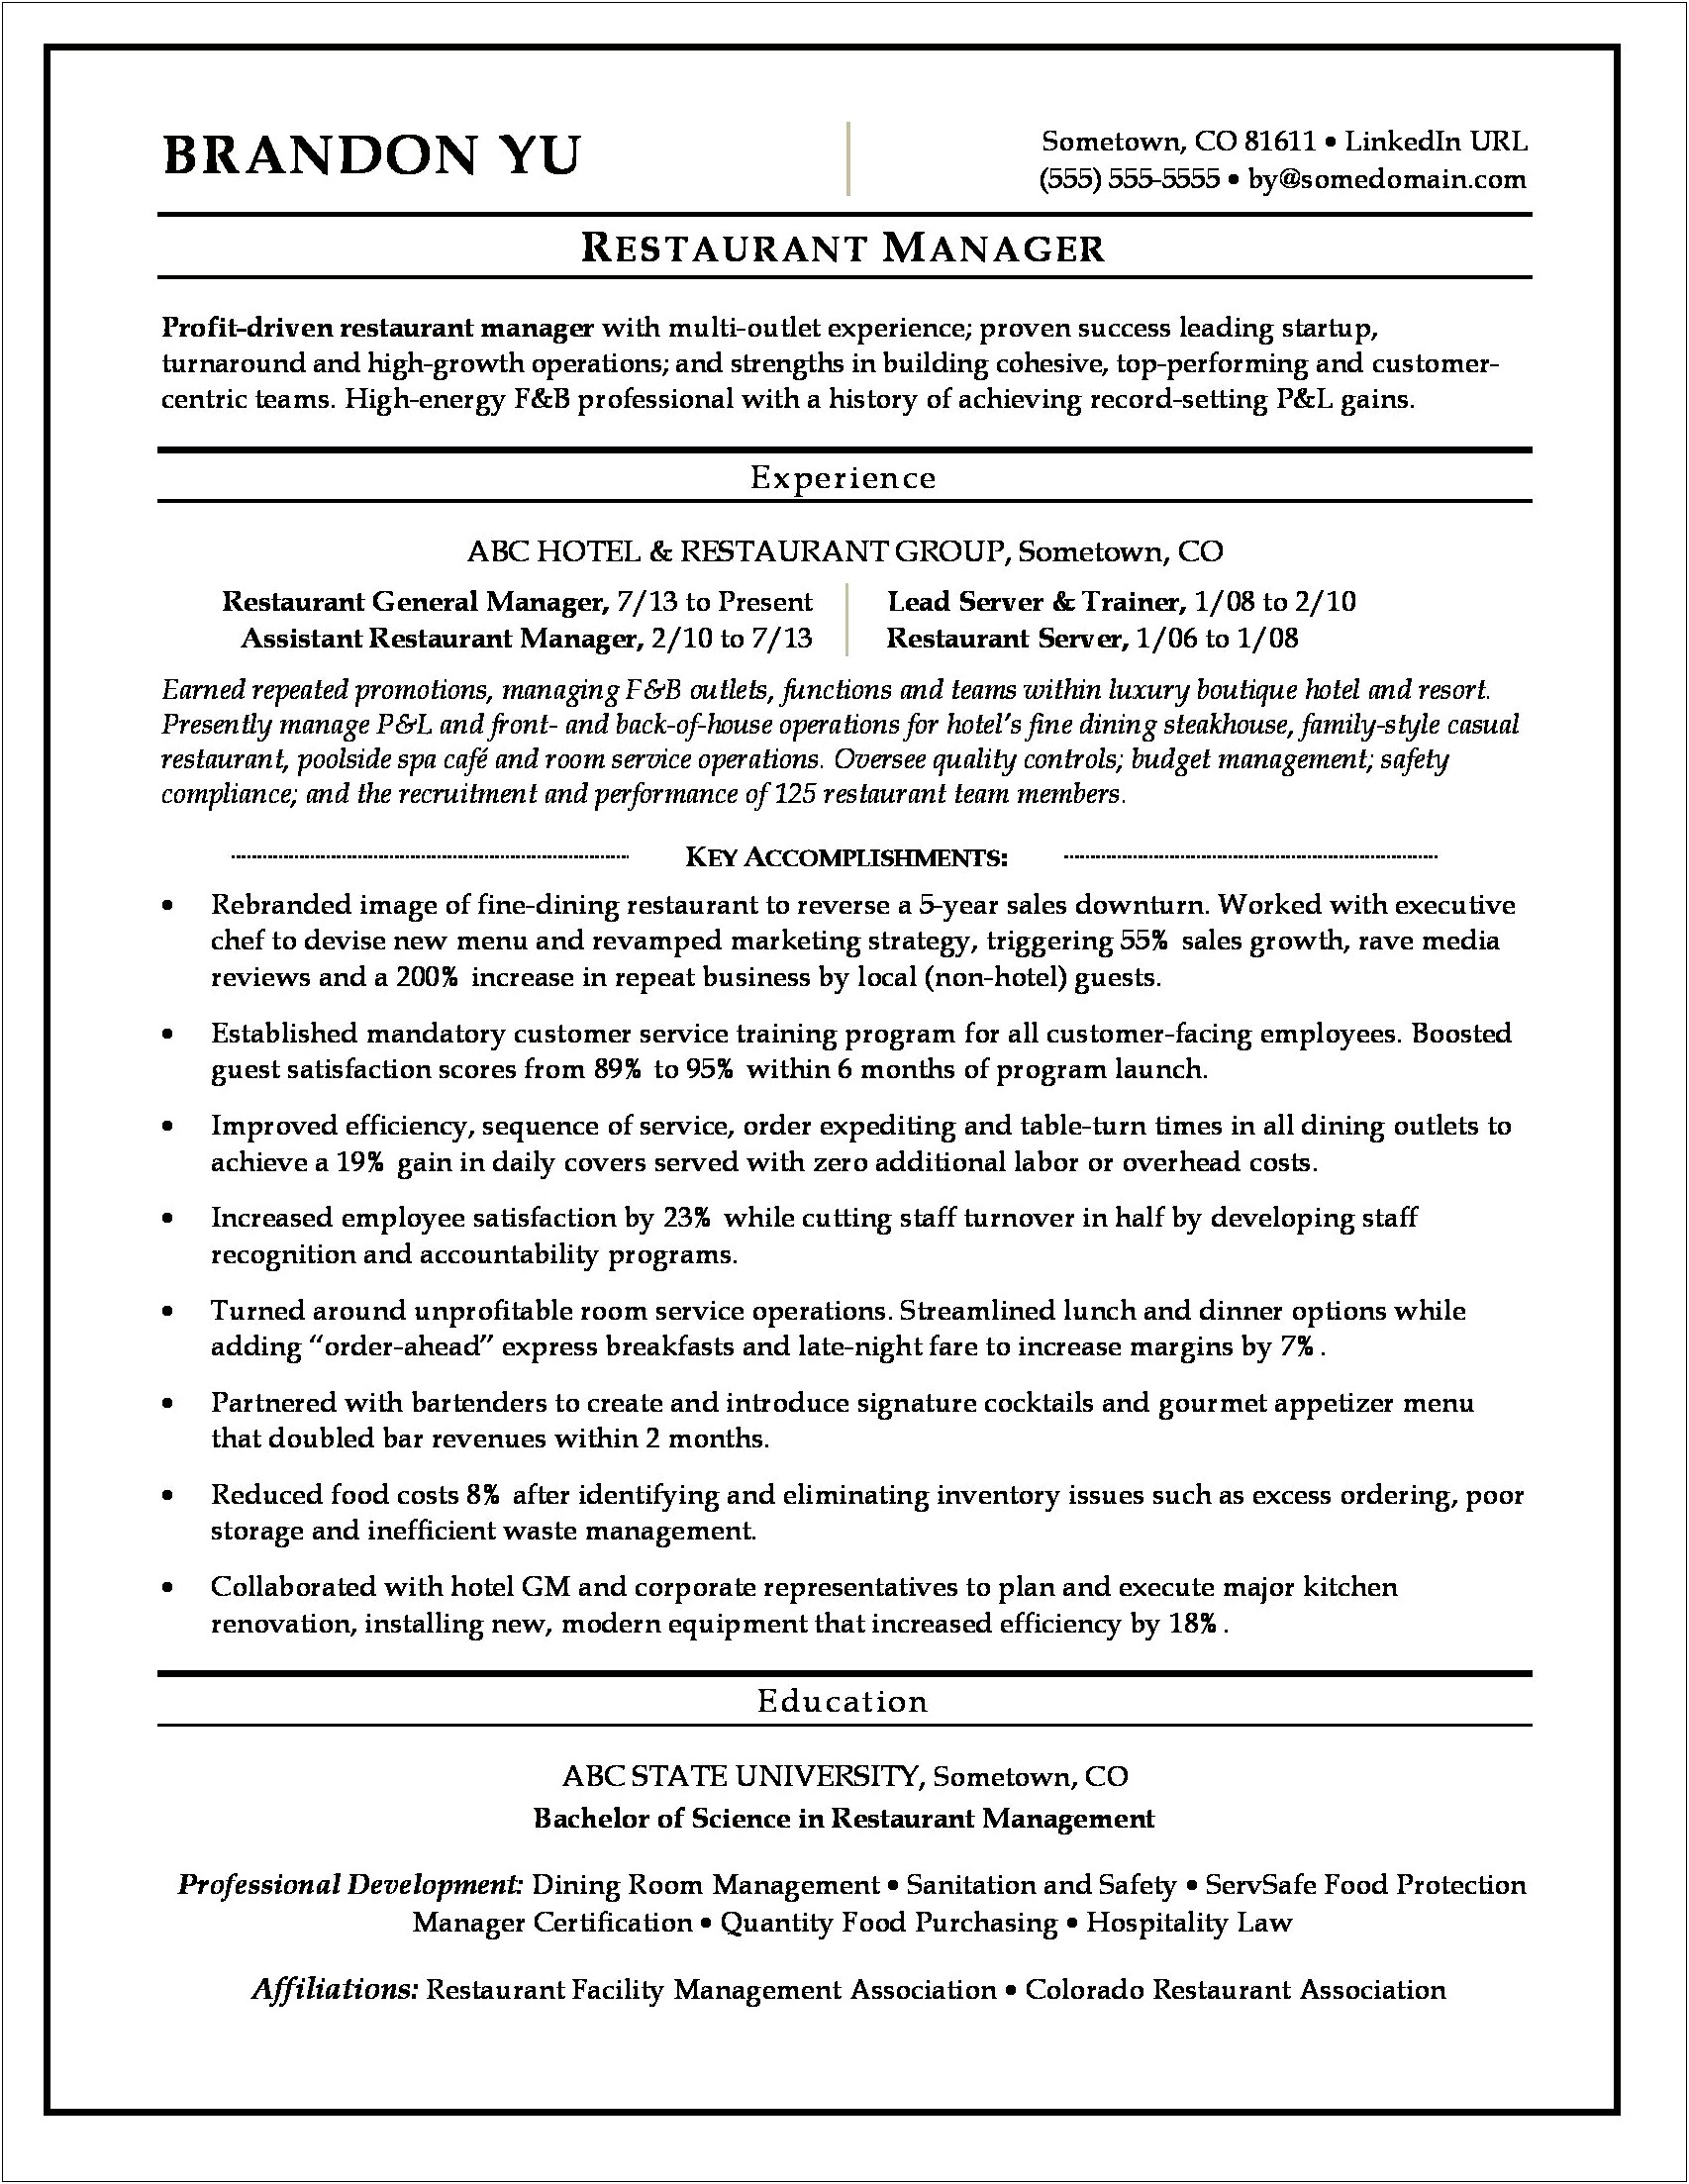 Examples Of Customer Service Manager Resumes